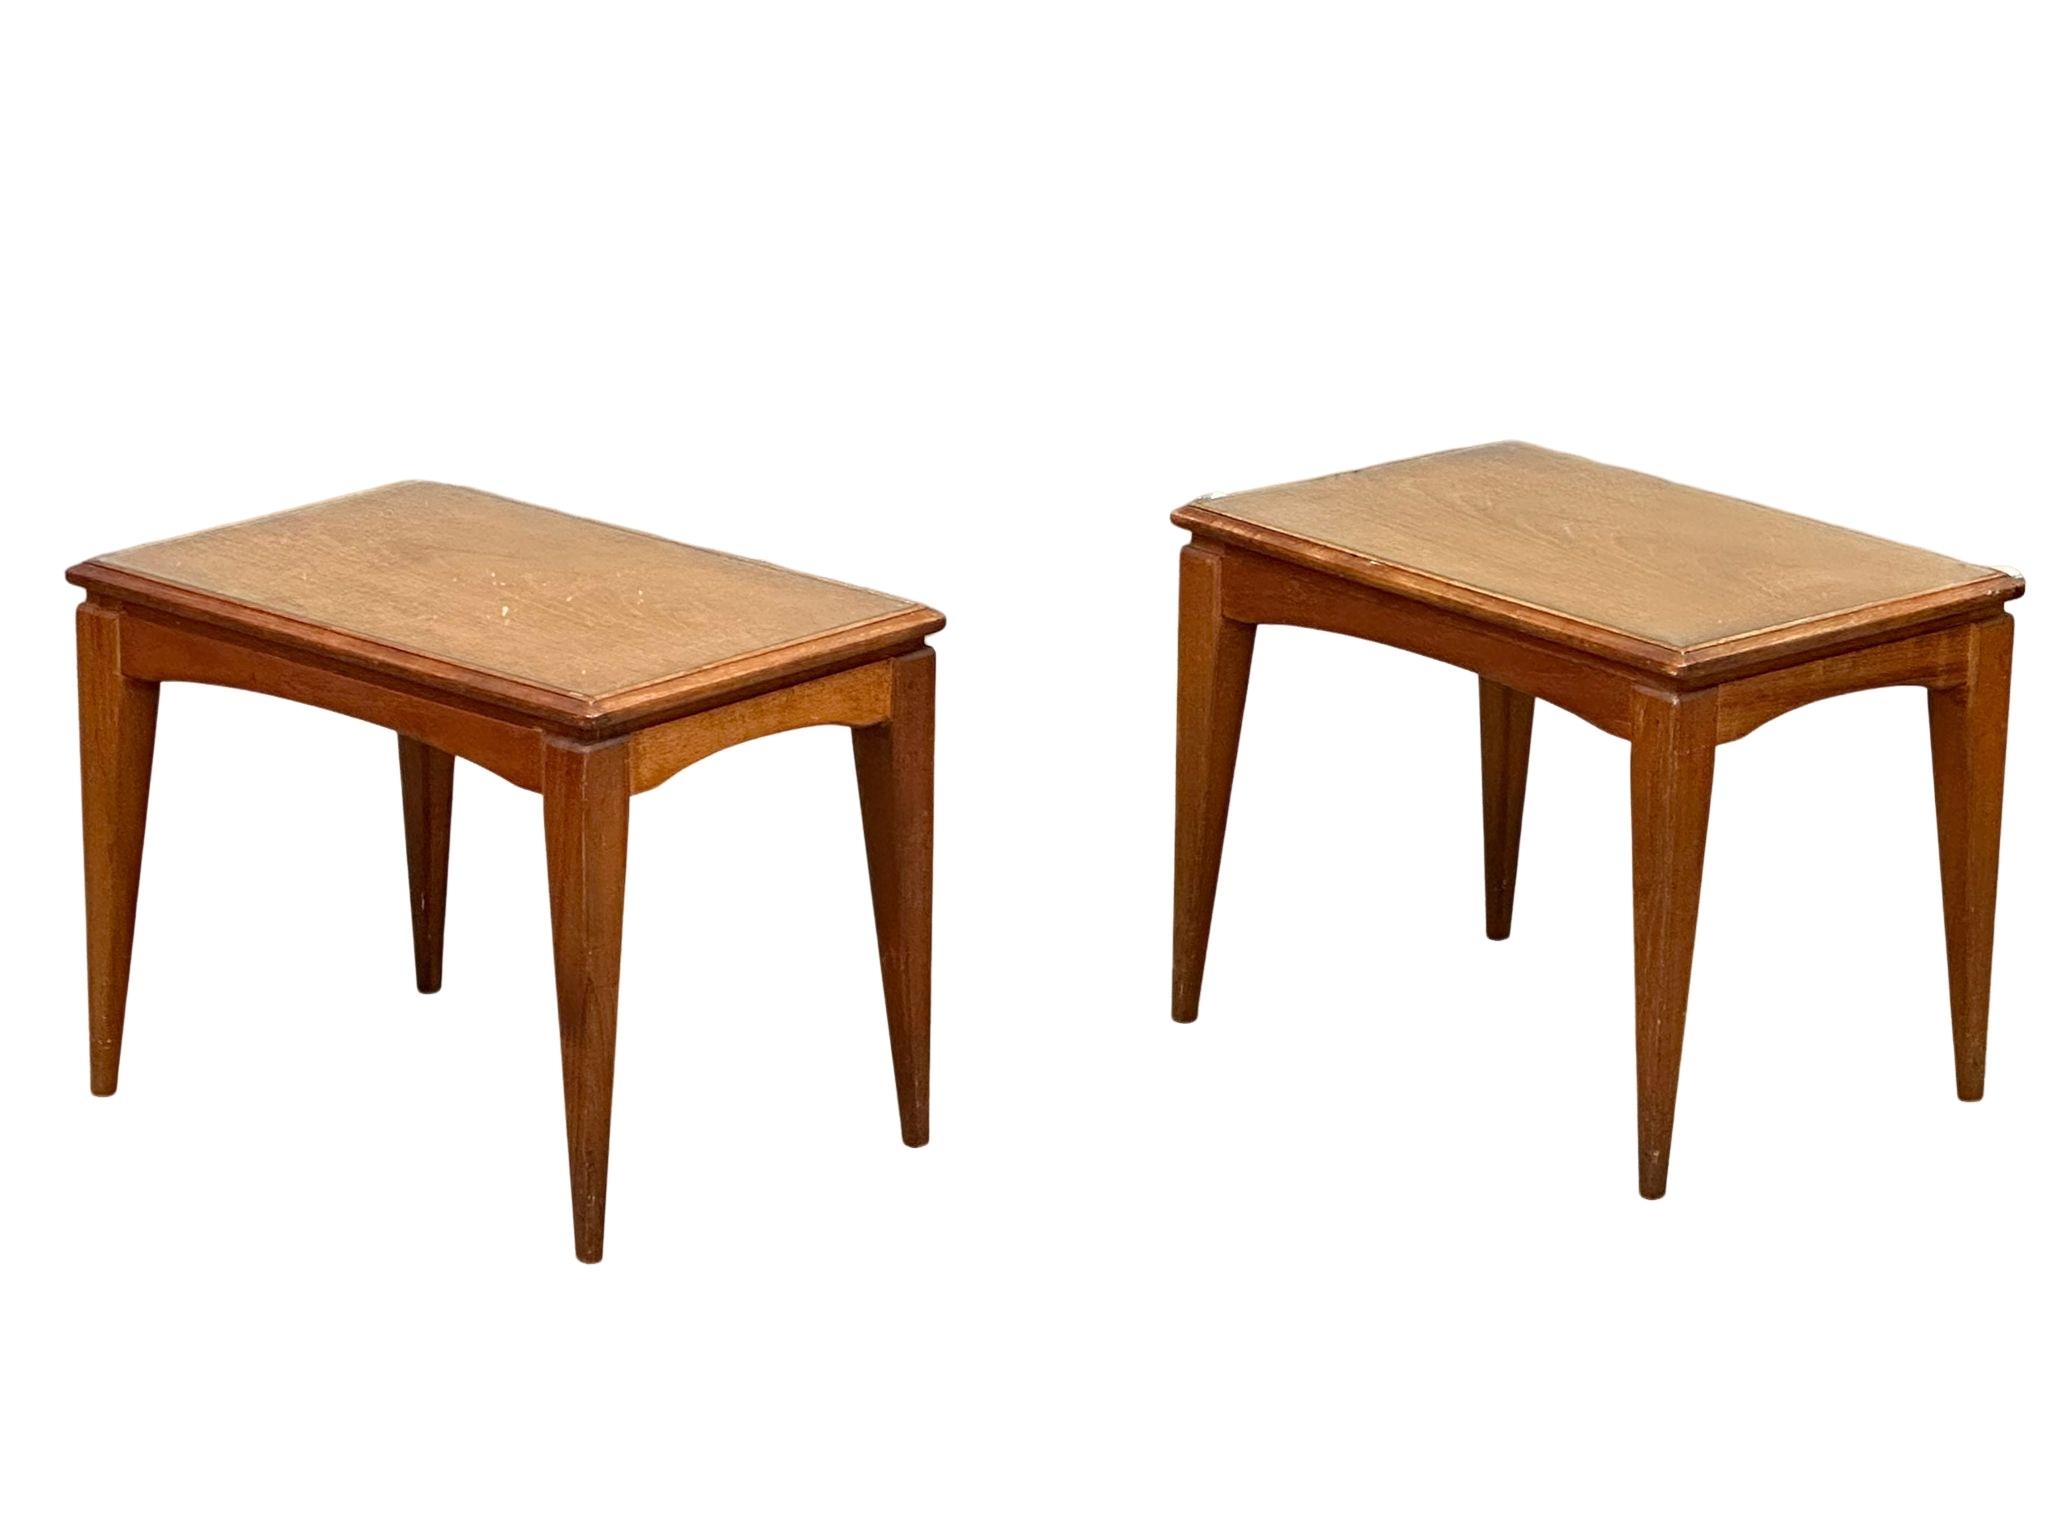 A pair of Mid Century teak lamp tables with glass tops, designed by Richard Hornby for Fyne Ladye - Image 3 of 4